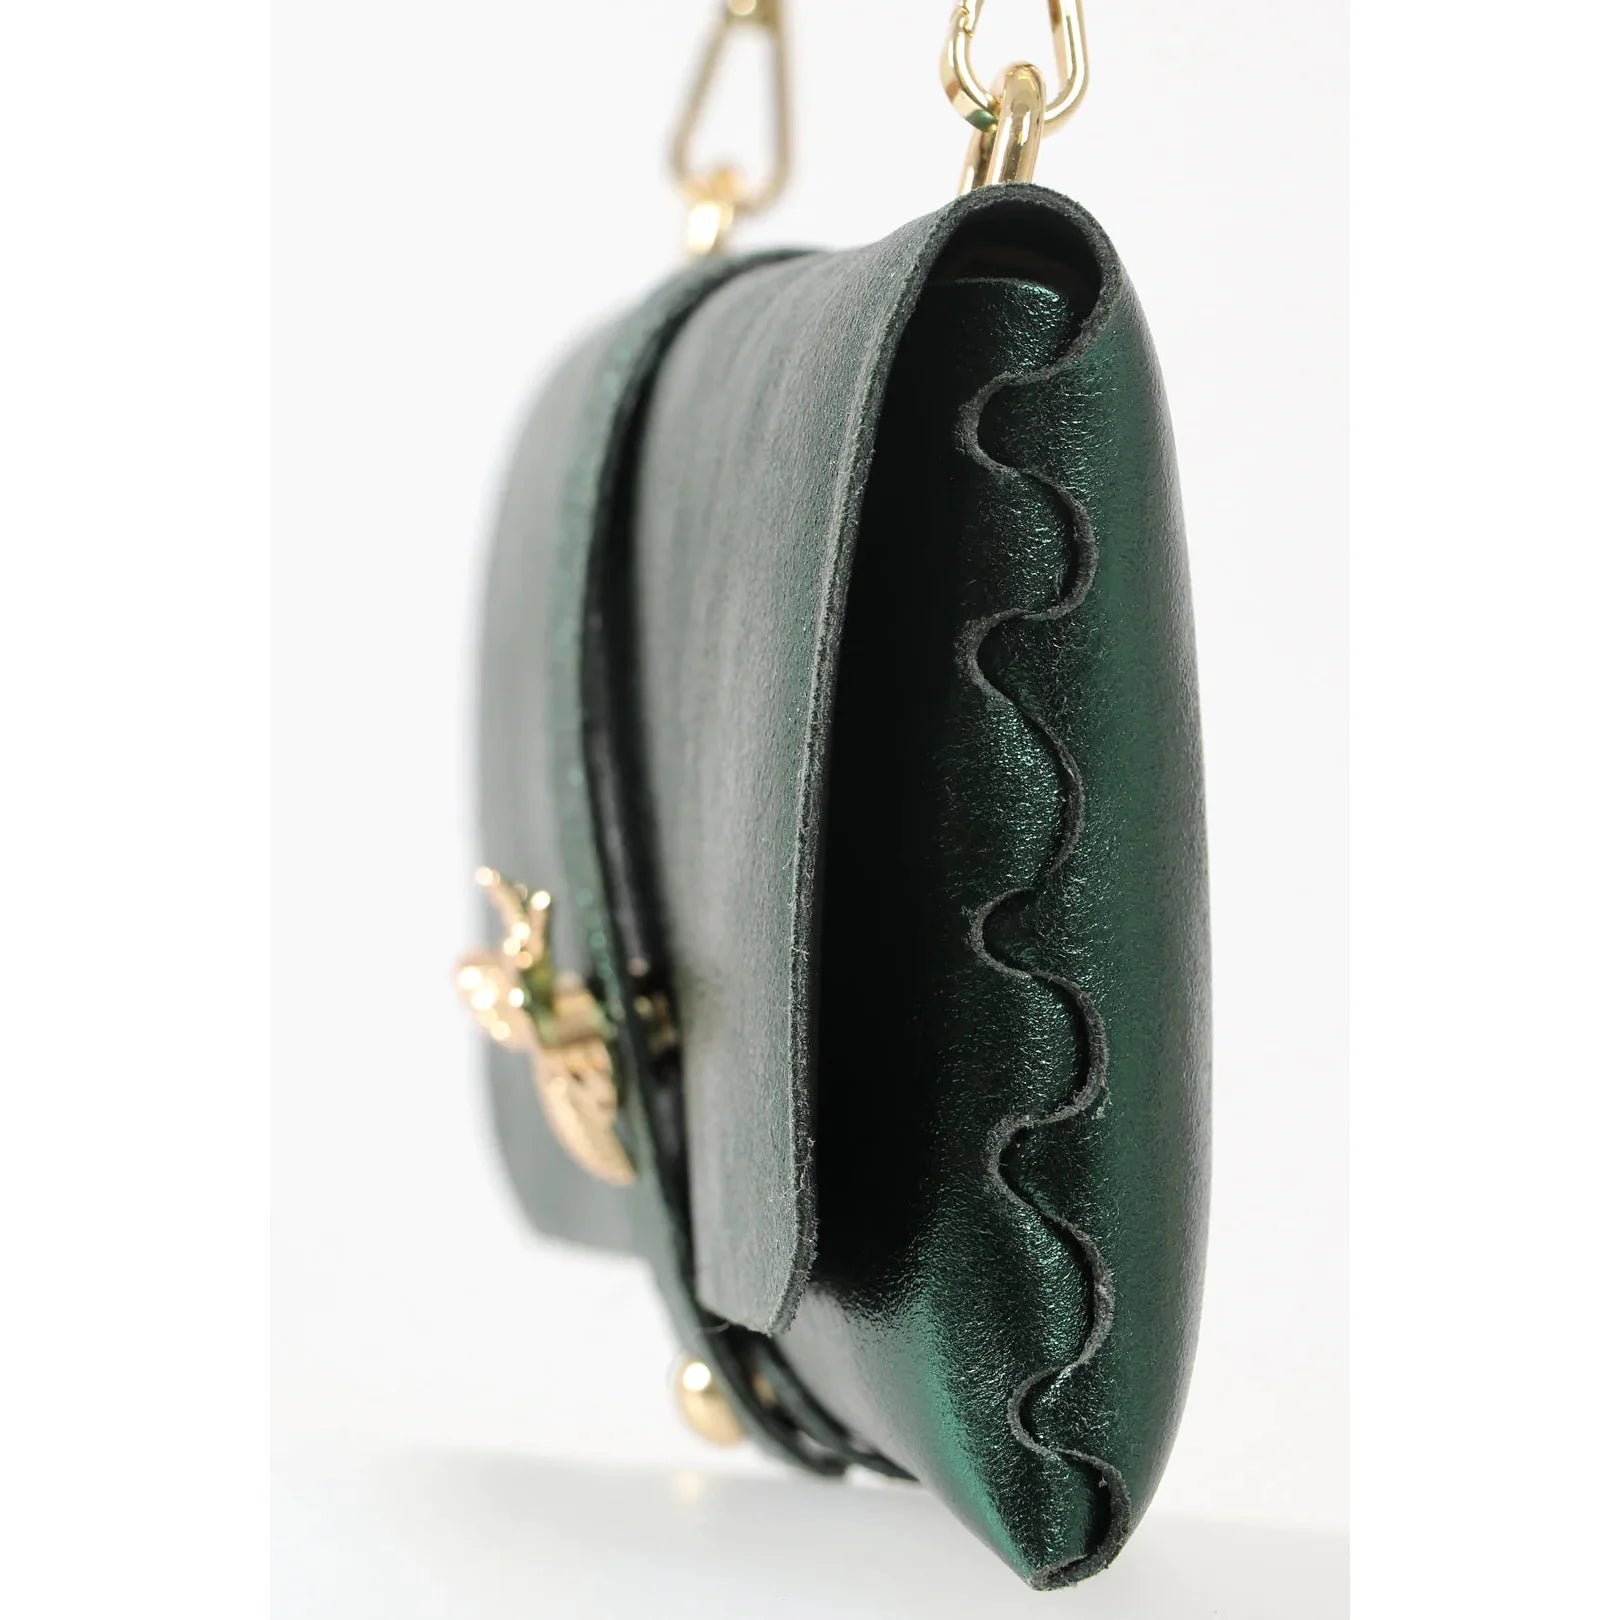 Metallic Emerald Green Leather Clutch Bag with Gold Bee & Chain Strap